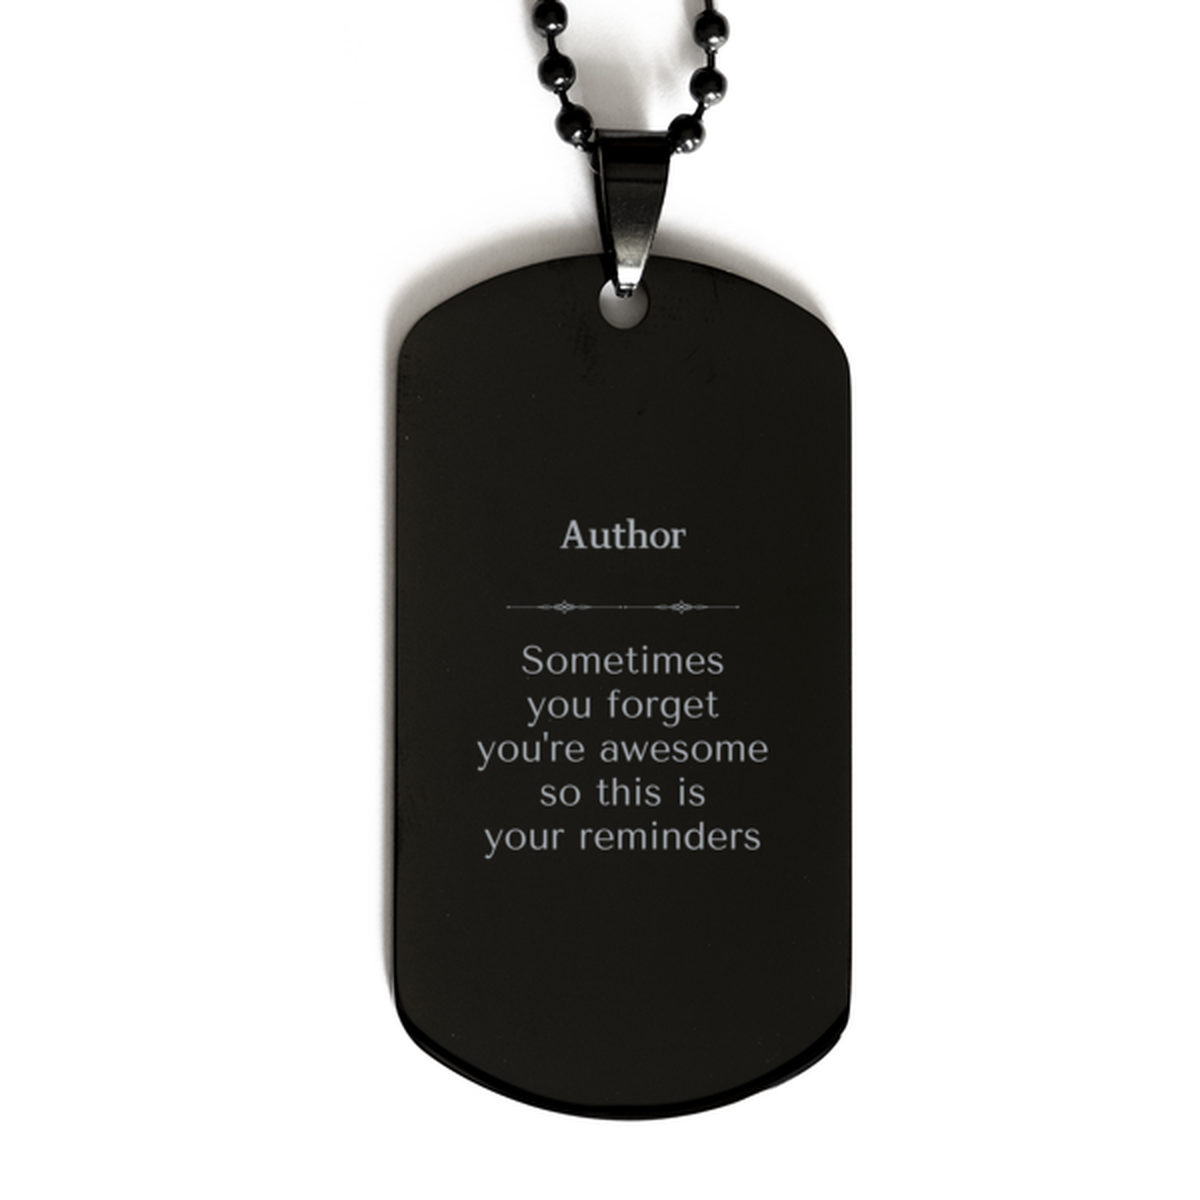 Sentimental Author Black Dog Tag, Author Sometimes you forget you're awesome so this is your reminders, Graduation Christmas Birthday Gifts for Author, Men, Women, Coworkers